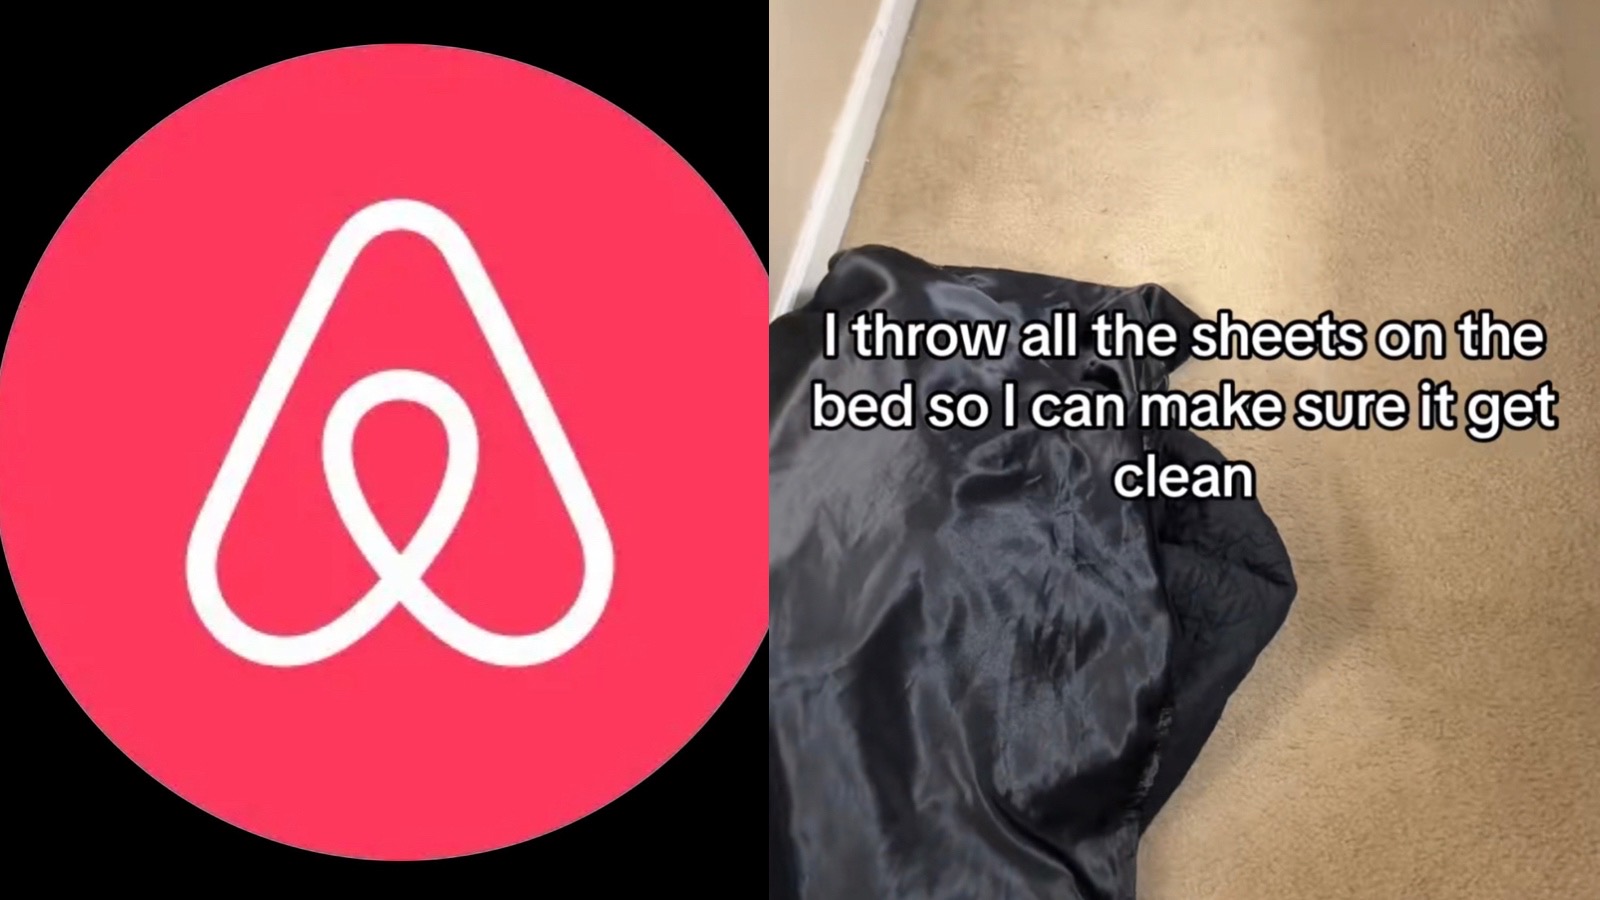 Airbnb host sparks debate after raging at guests for making beds before checkout - Dexerto